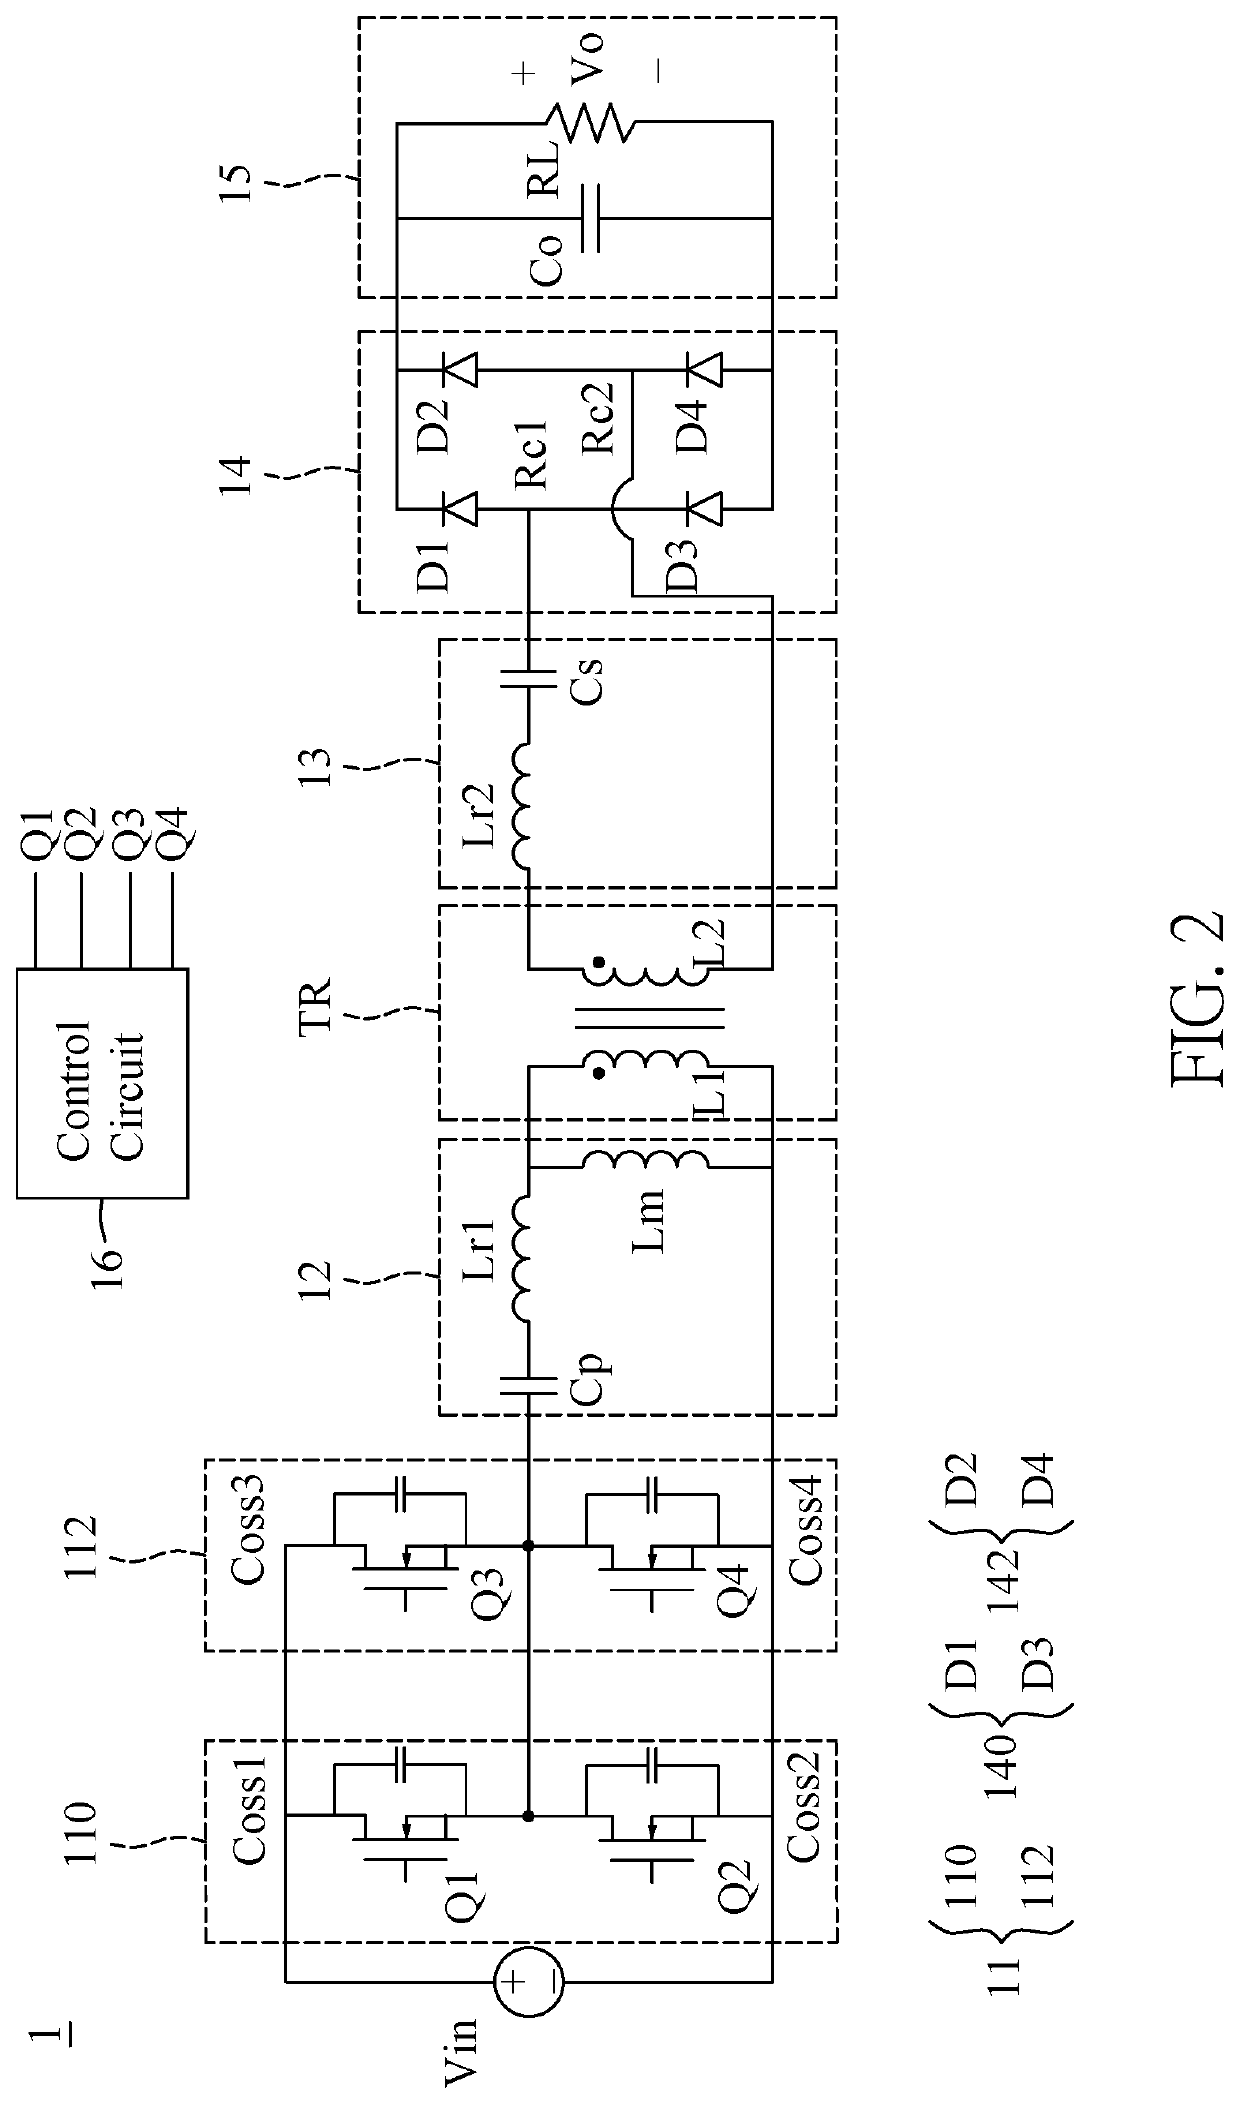 High frequency time-division multi-phase power converter